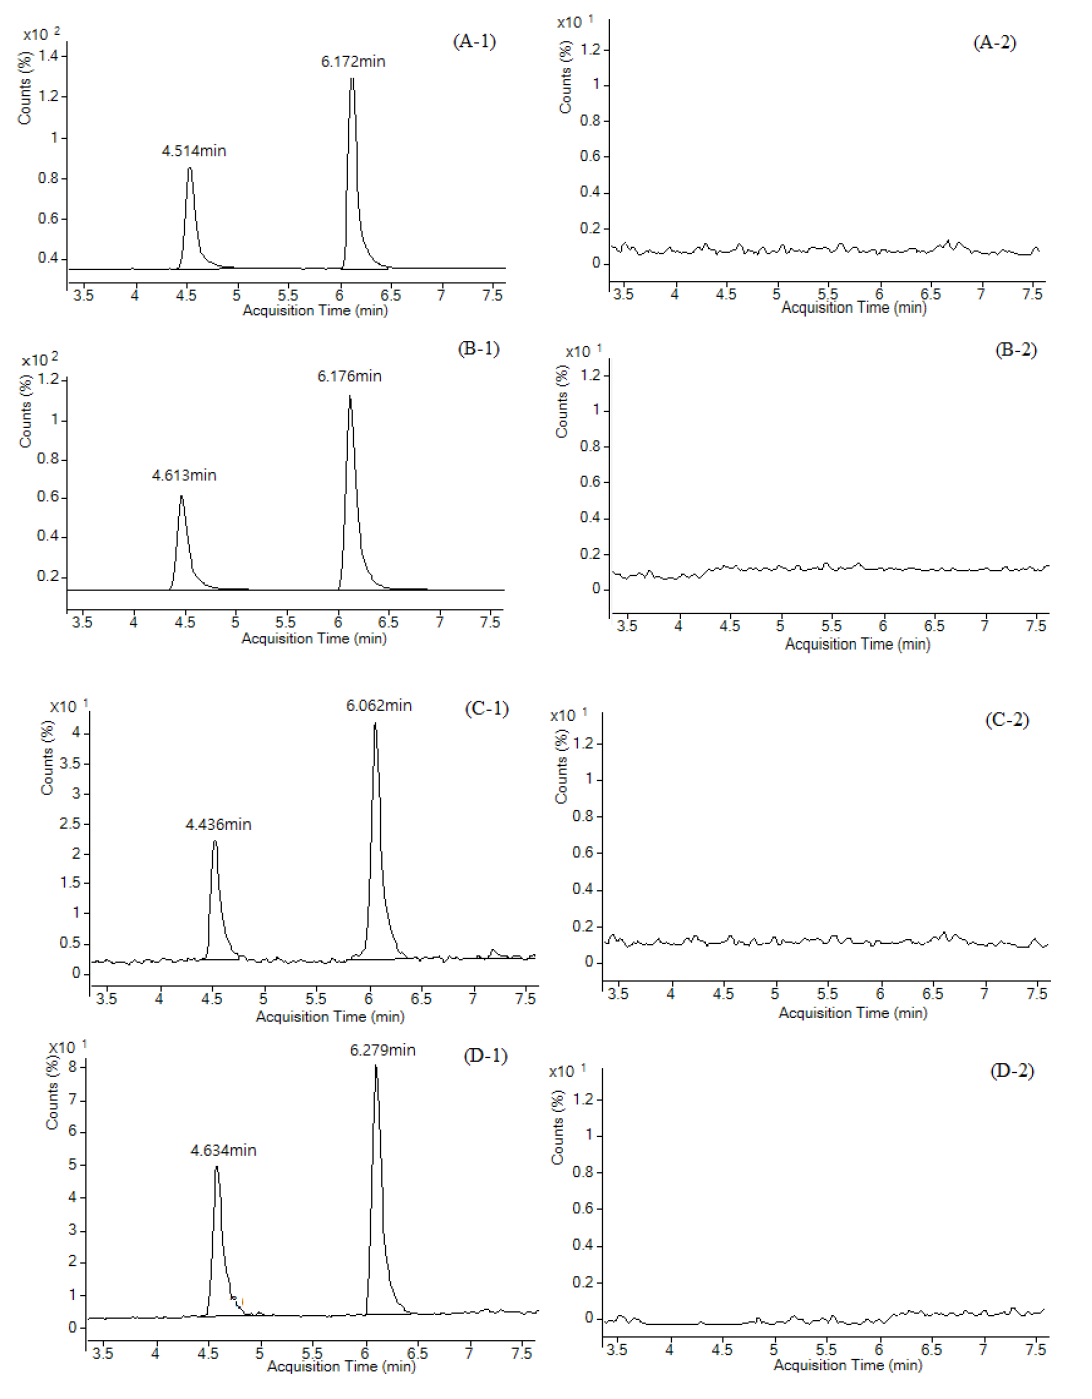 MRM LC-MS/MS chromatograms of trichlorfon and dichlorvos standard at 100 μg/kg in Paralichthys olivaceus (A-1), blank Paralichthys olivaceus sample (A-2), standard at 100 μg/kg in Sebastes schlegelii (B-1), blank Sebastes schlegelii sample (B-2), standard at 100 μg/kg in Cyprinus carpio nudus (C-1), blank Cyprinus carpio nudus sample (C-2), standard at 100 μg/kg in Anguilla japonica (D-1), blank Anguilla japonica sample (D-2)